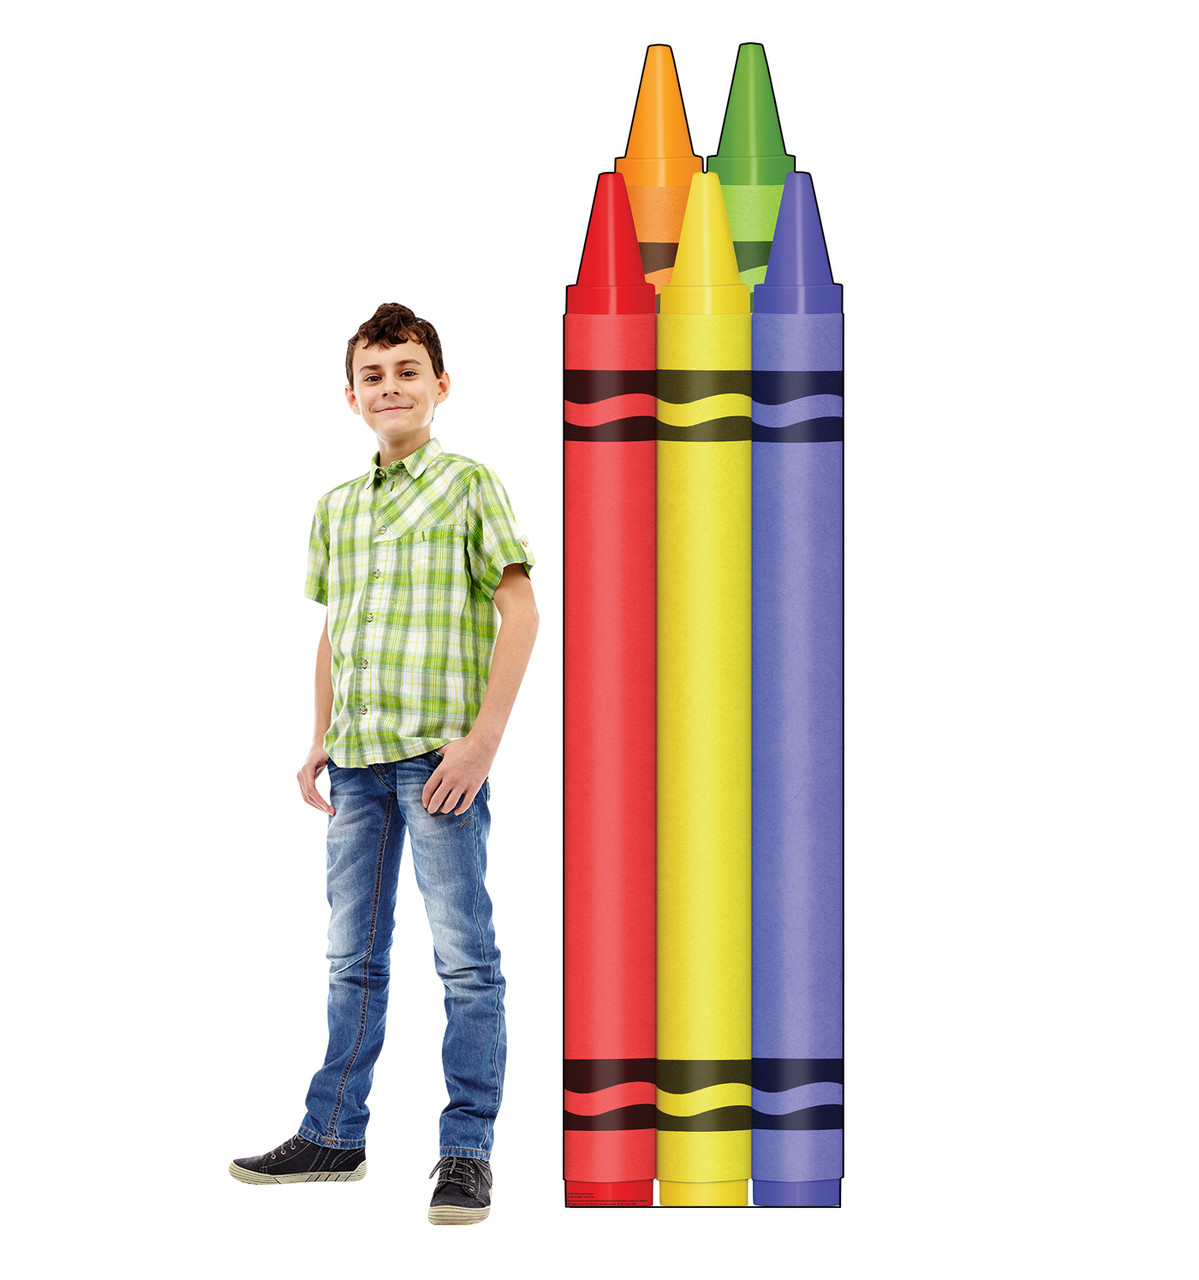 Life-size cardboard standee of Coloring Crayons with model.